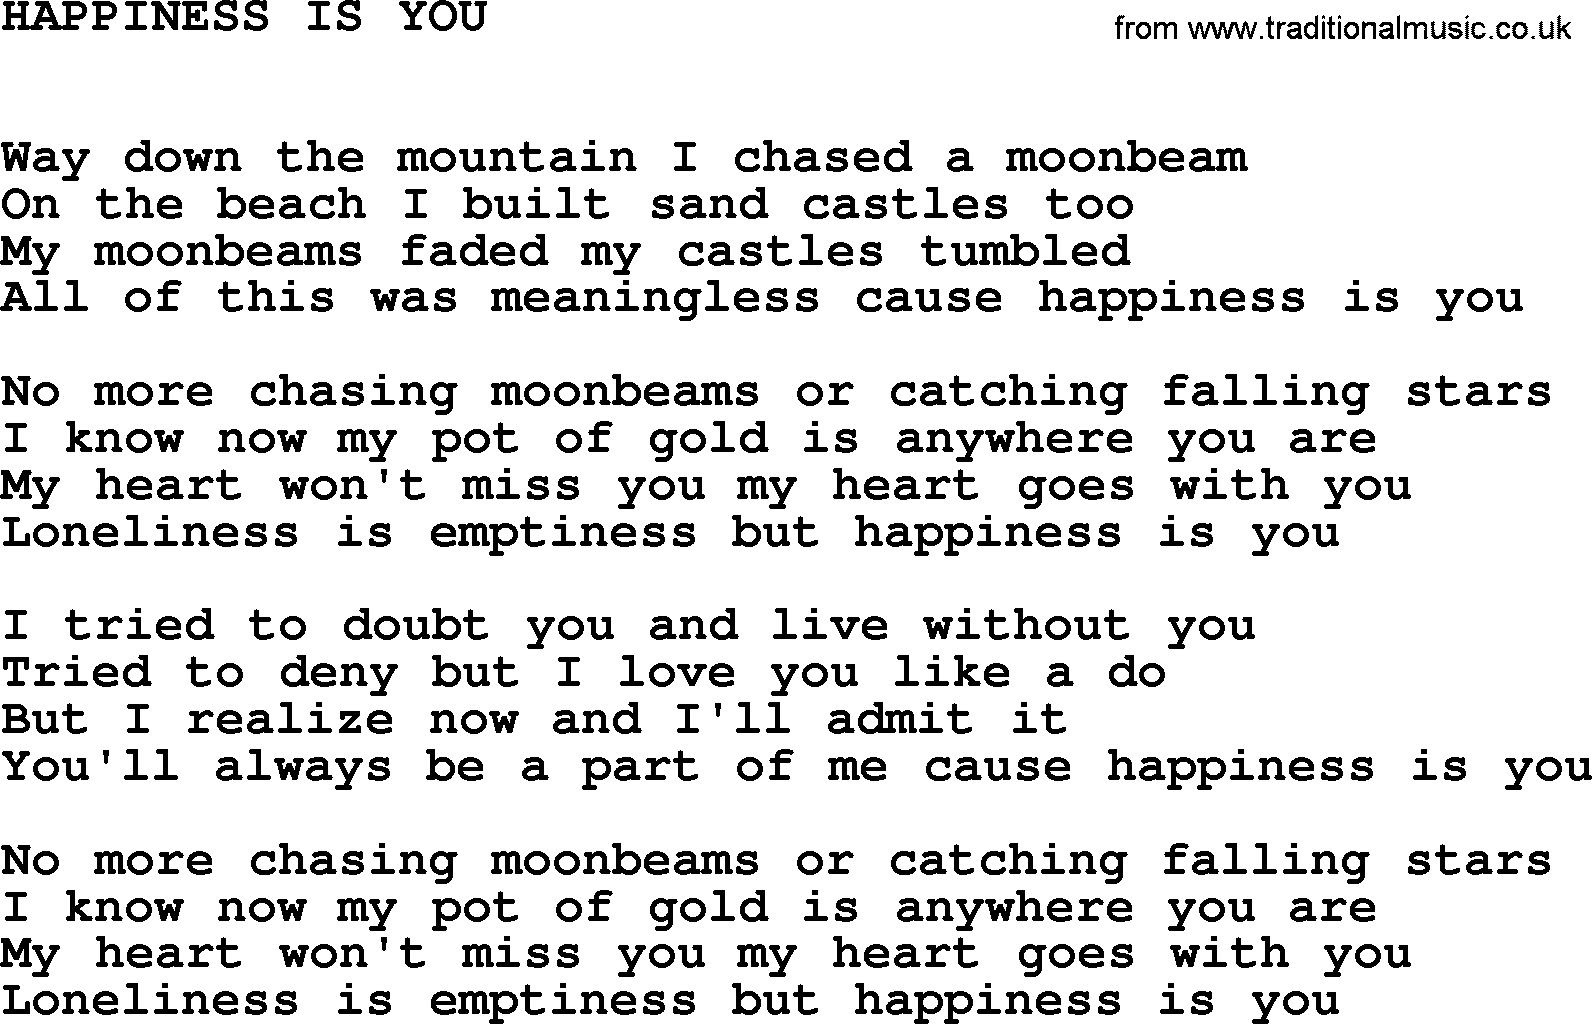 Johnny Cash song Happiness Is You.txt lyrics